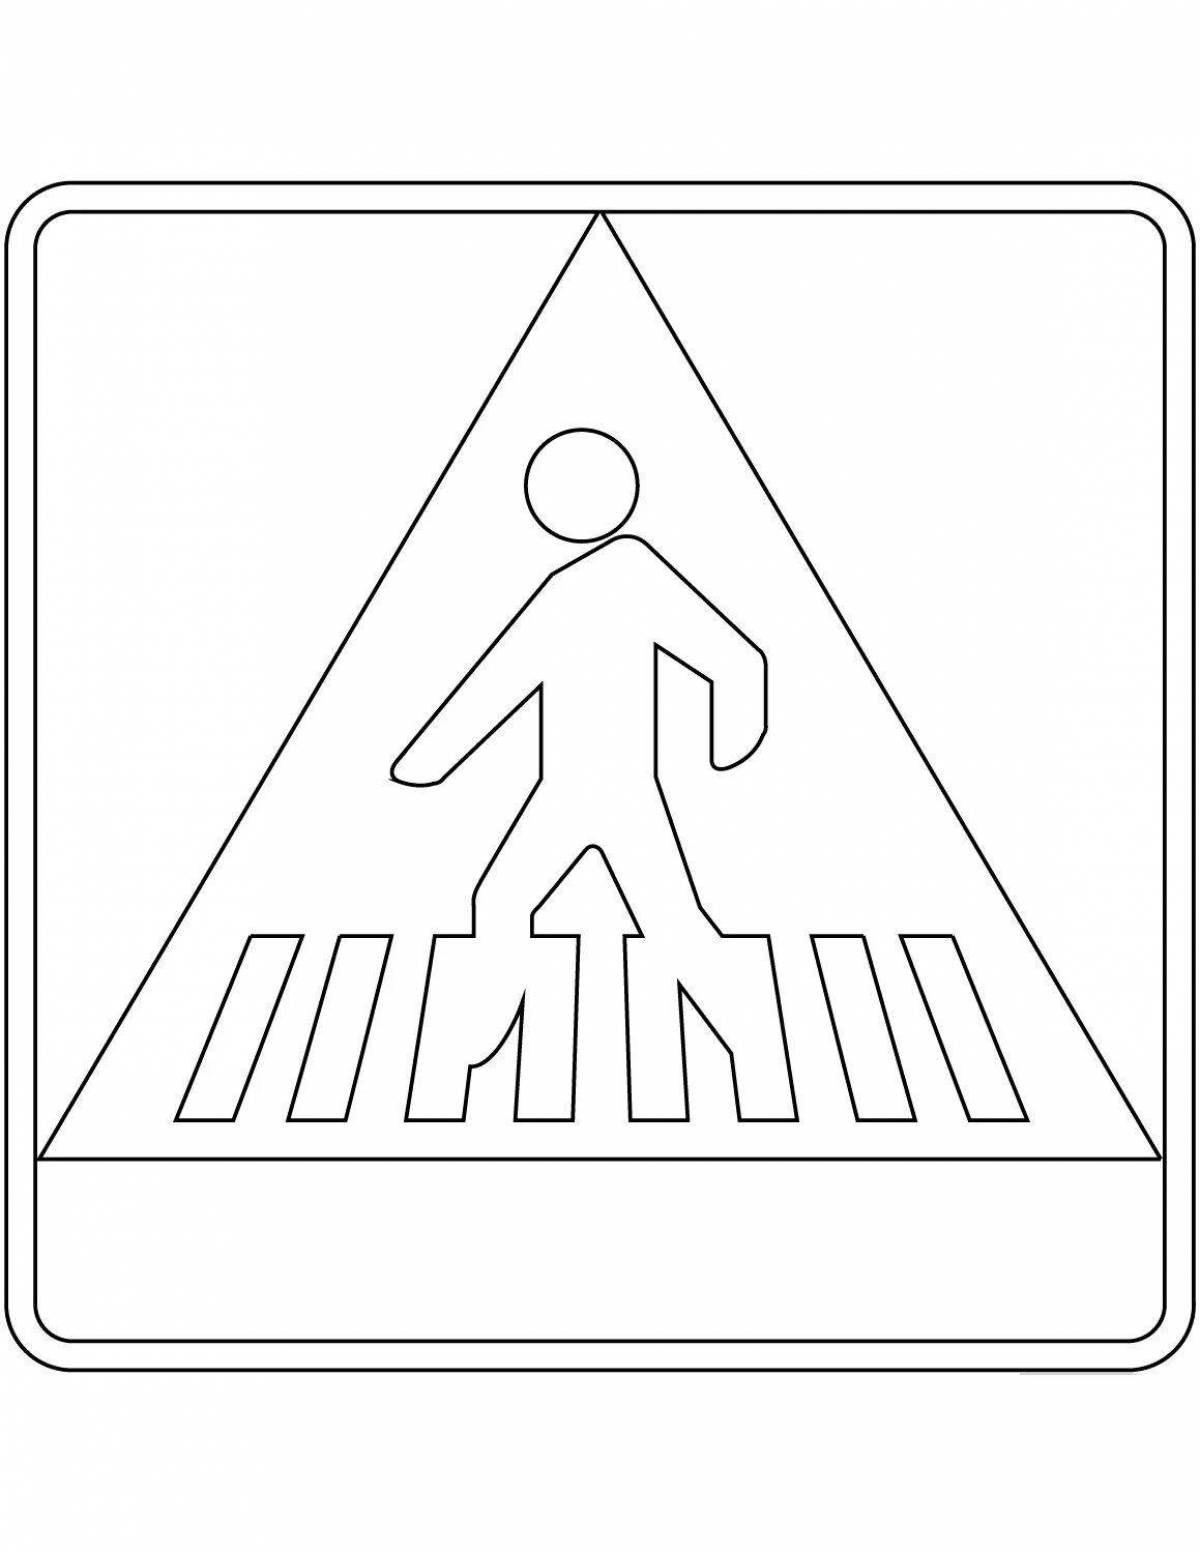 Coloring page mystical overpass sign